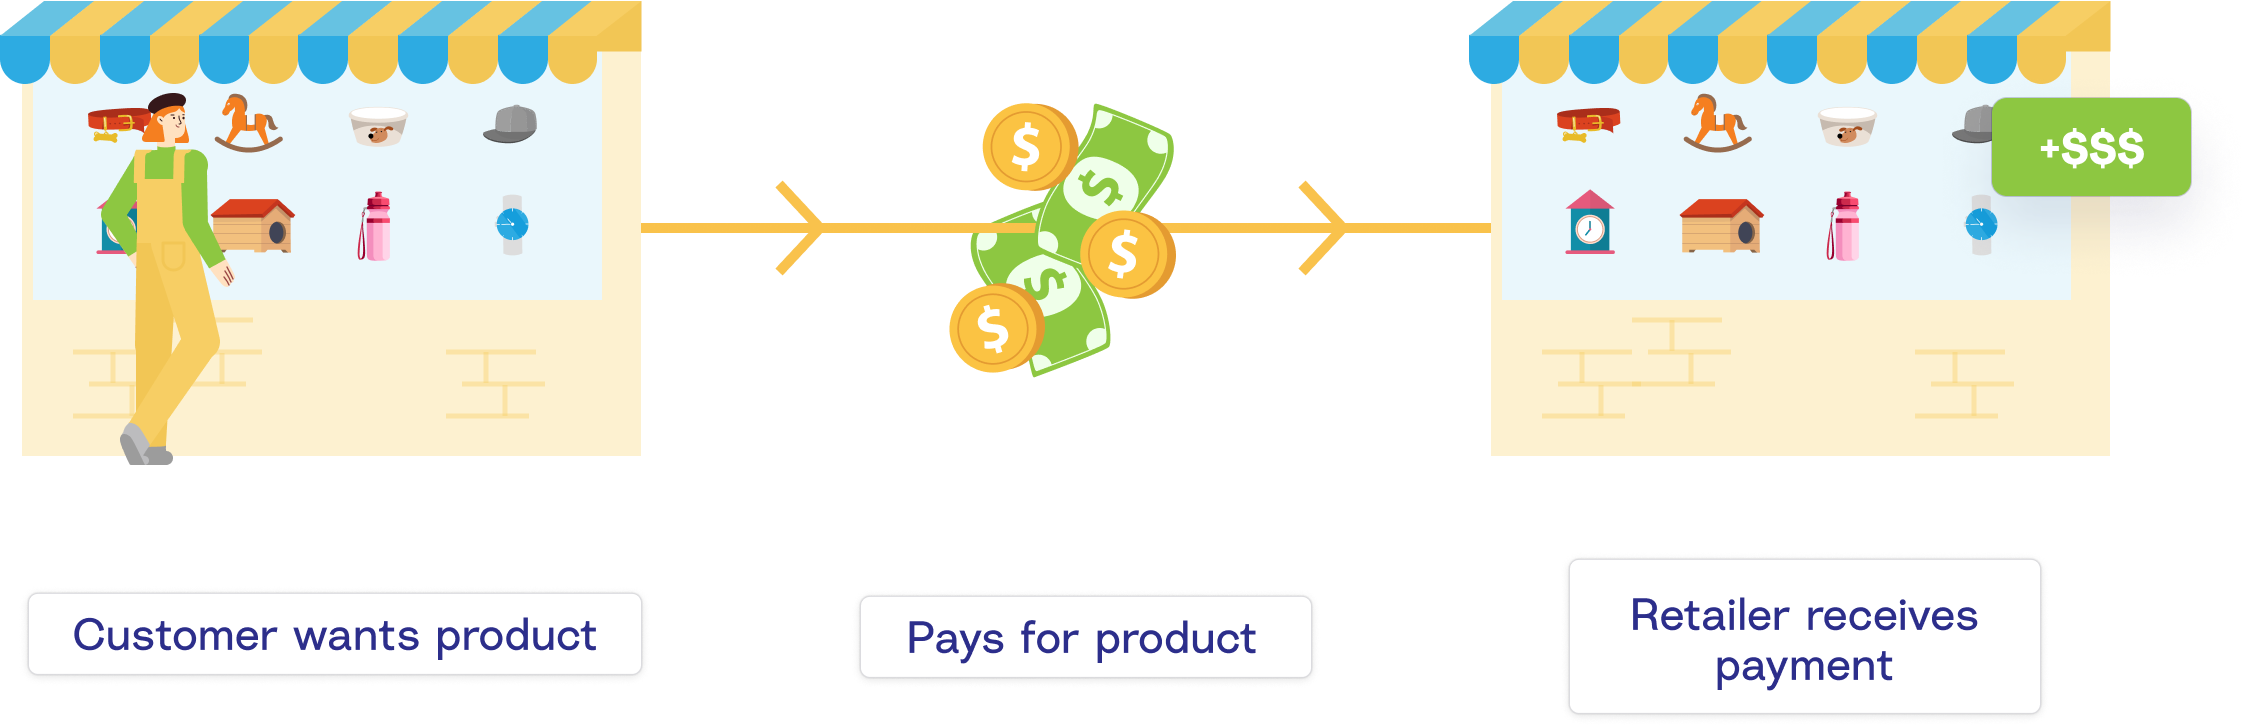 a flowchart showing the process for traditional commerce: a customer wants a product, they pay for it in the store, the seller/retailer receives that payment (in full) instantly